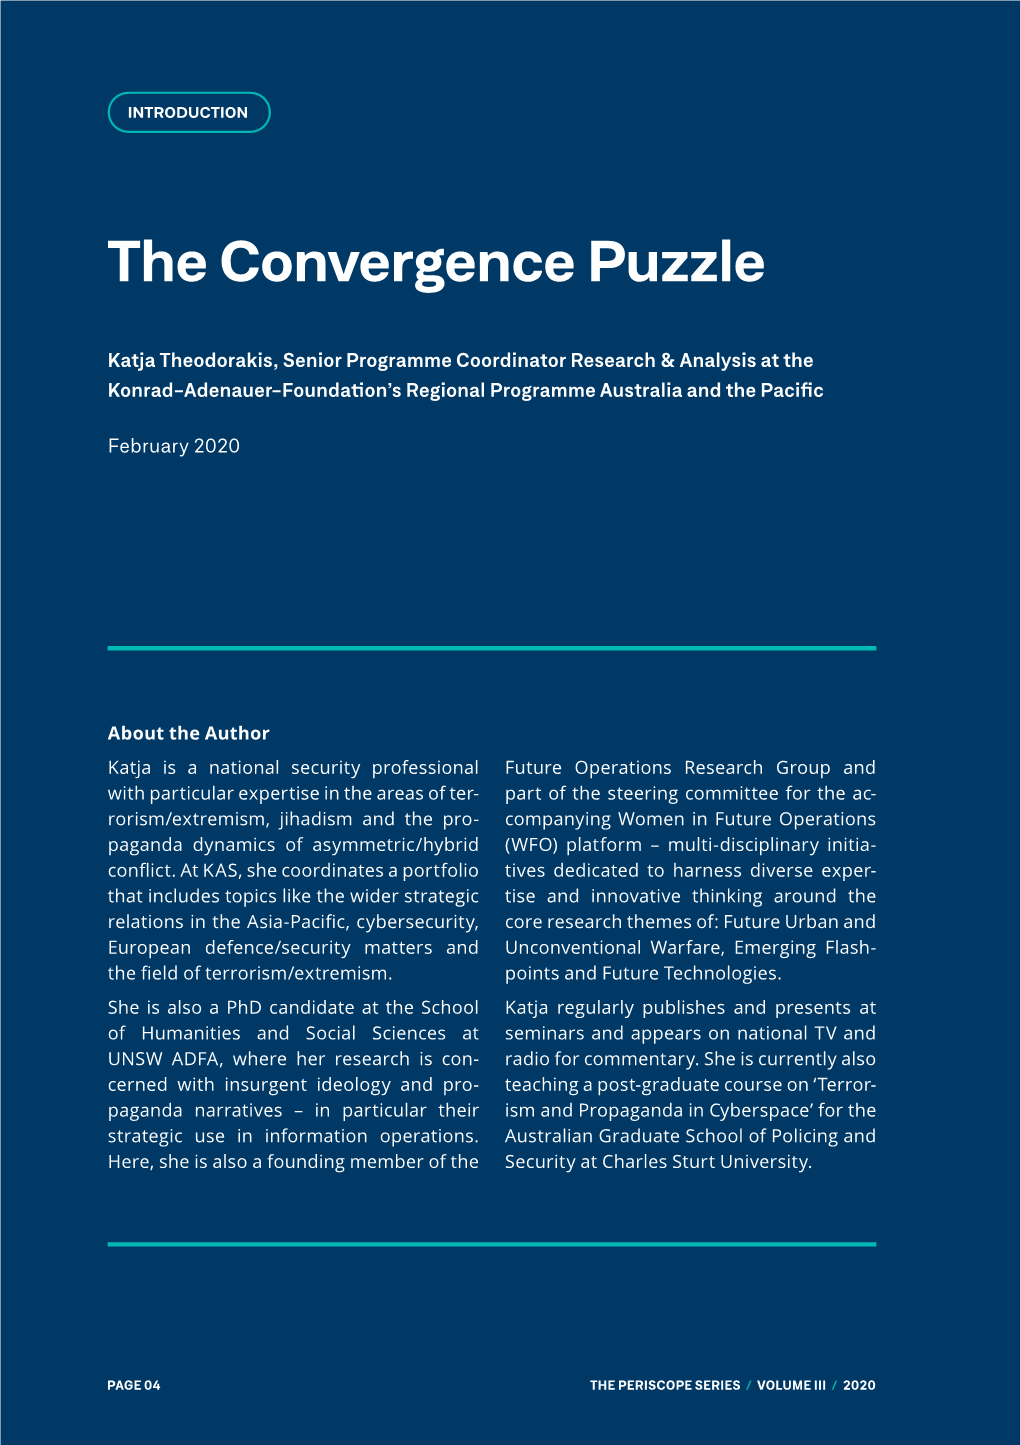 The Convergence Puzzle